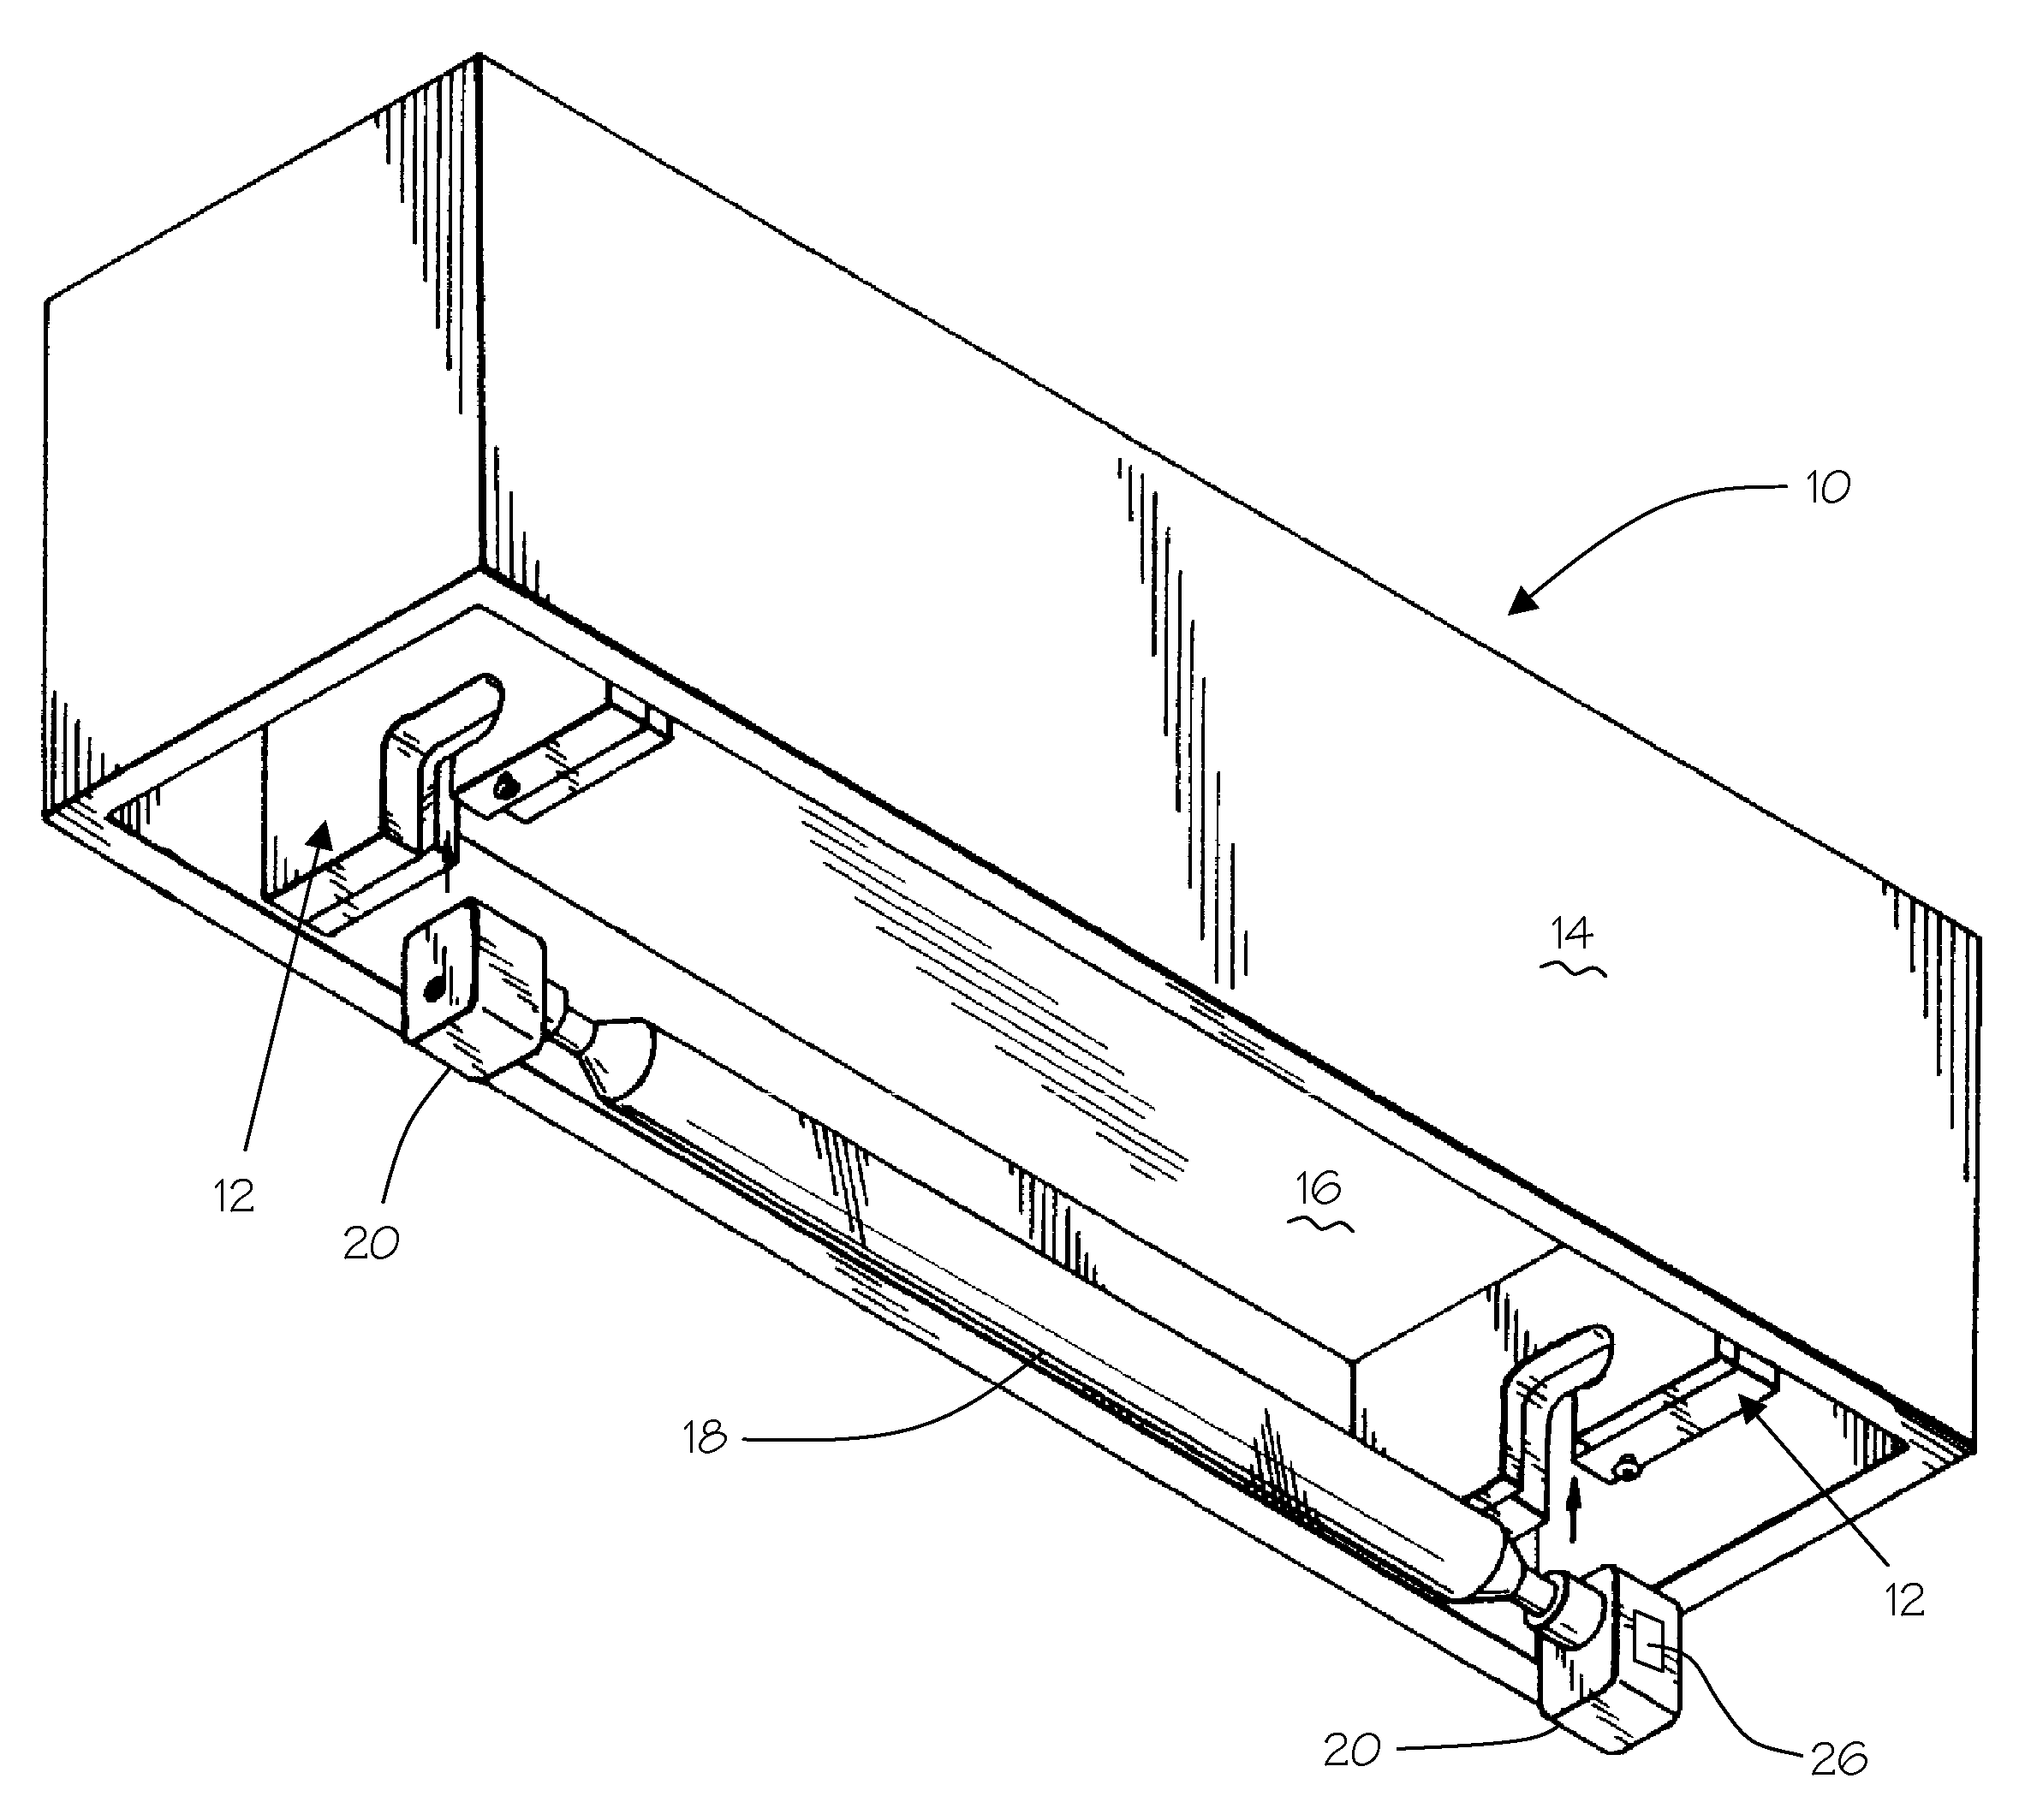 Lamp assemblies, lamp systems, and methods of operating lamp systems